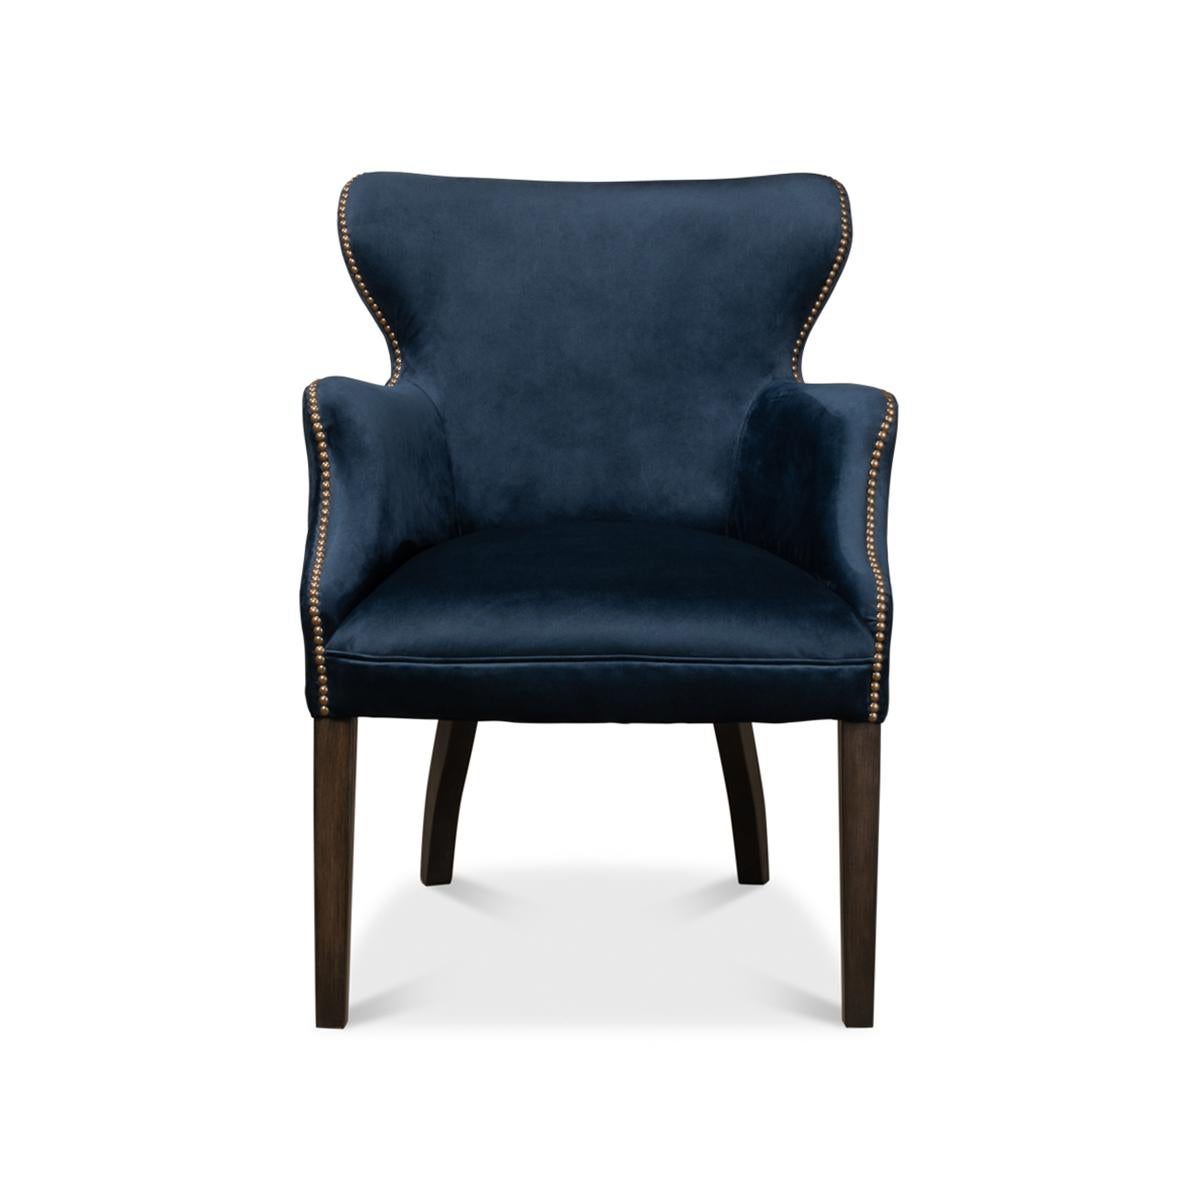 The rich deep blue velvet blends perfectly with the polished finish to the legs and the brass nailhead trim details.

Dimensions: 30